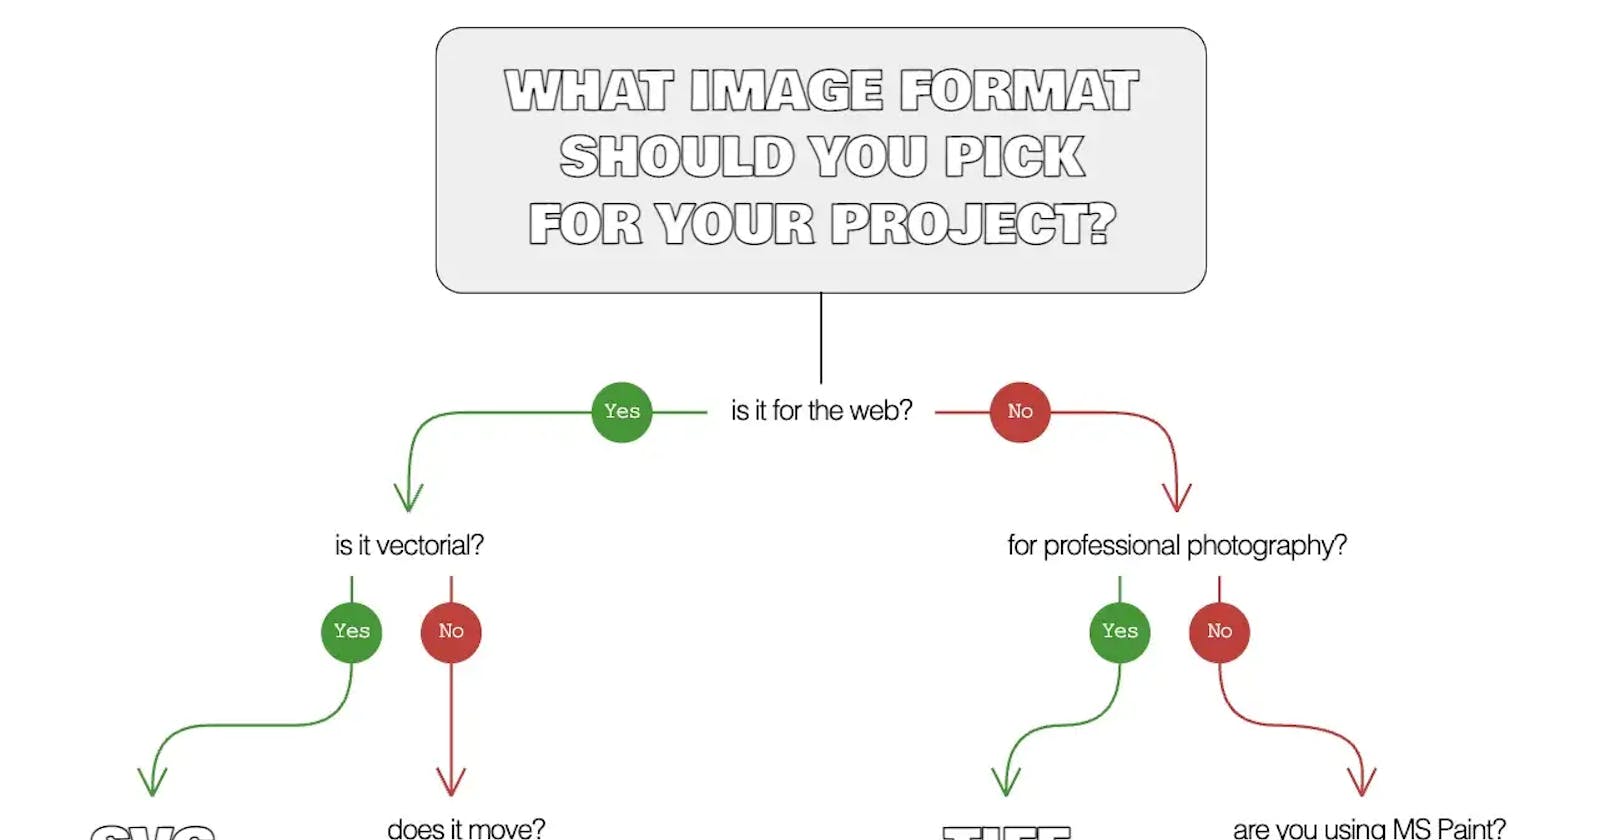 What image format should you use in your next project?